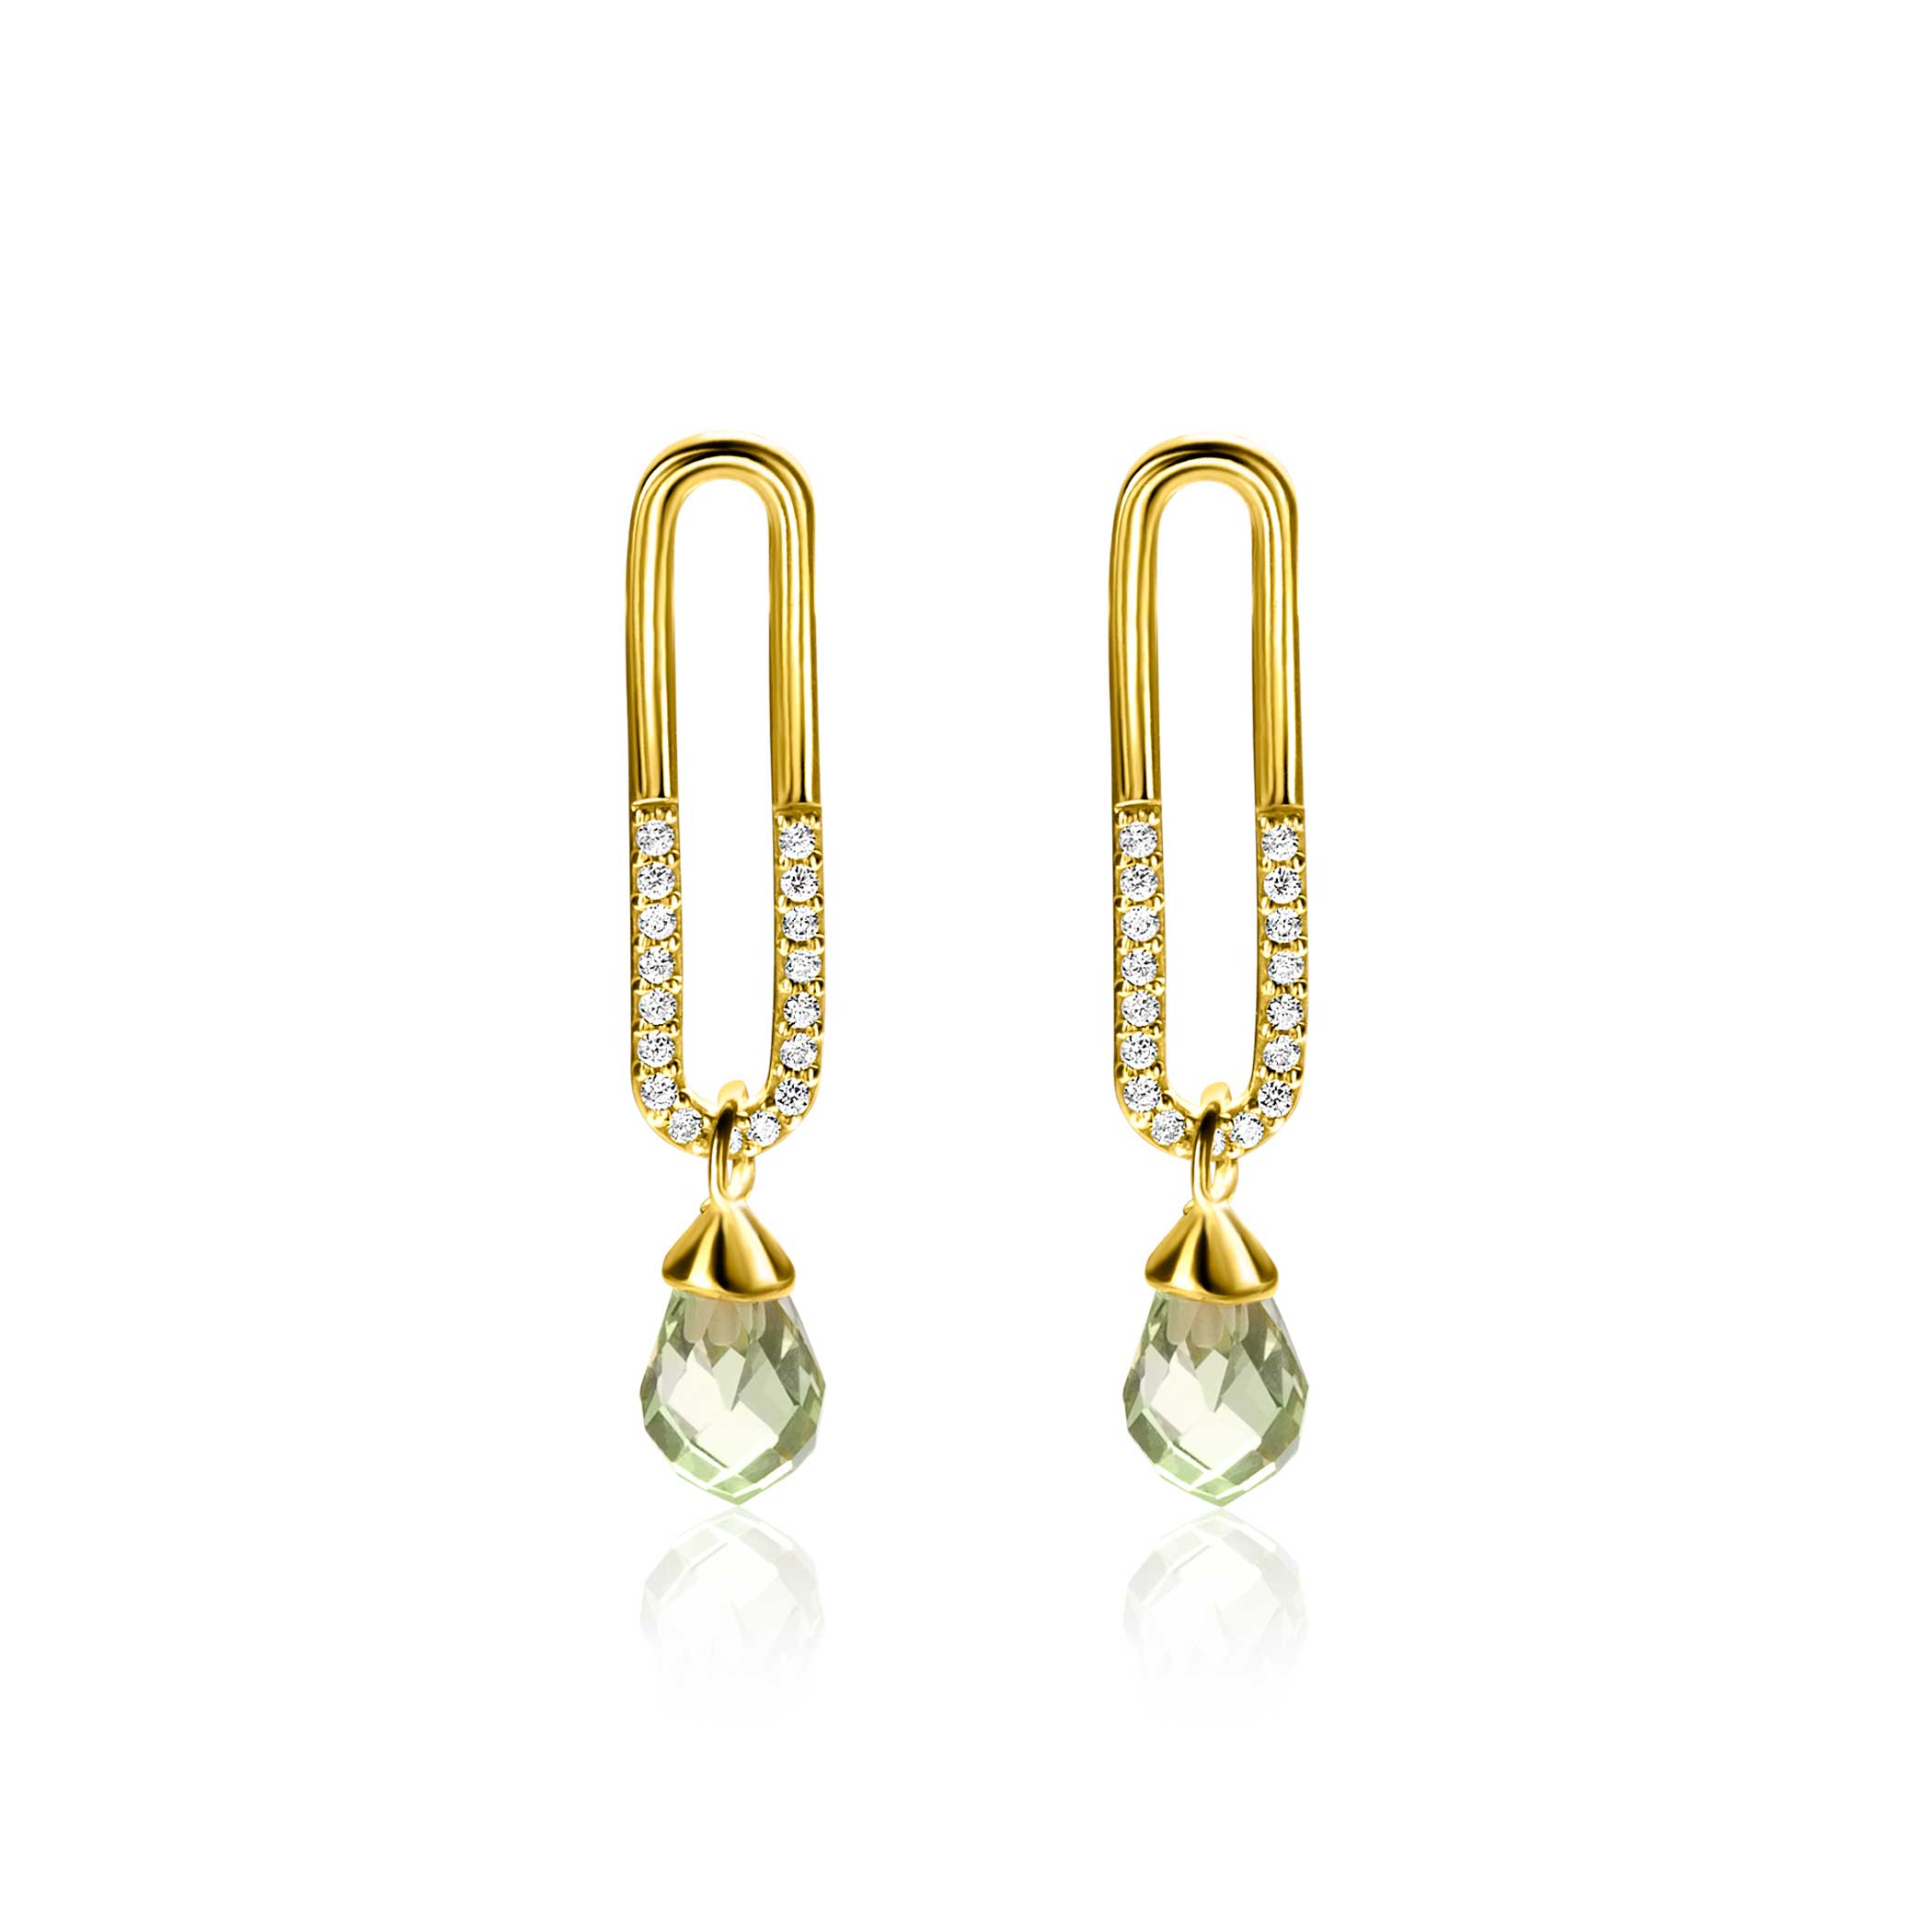 30mm ZINZI Gold Plated Sterling Silver Stud Earrings with Trendy Open Oval Shape and Green Peridot Drop Charm ZIO2430